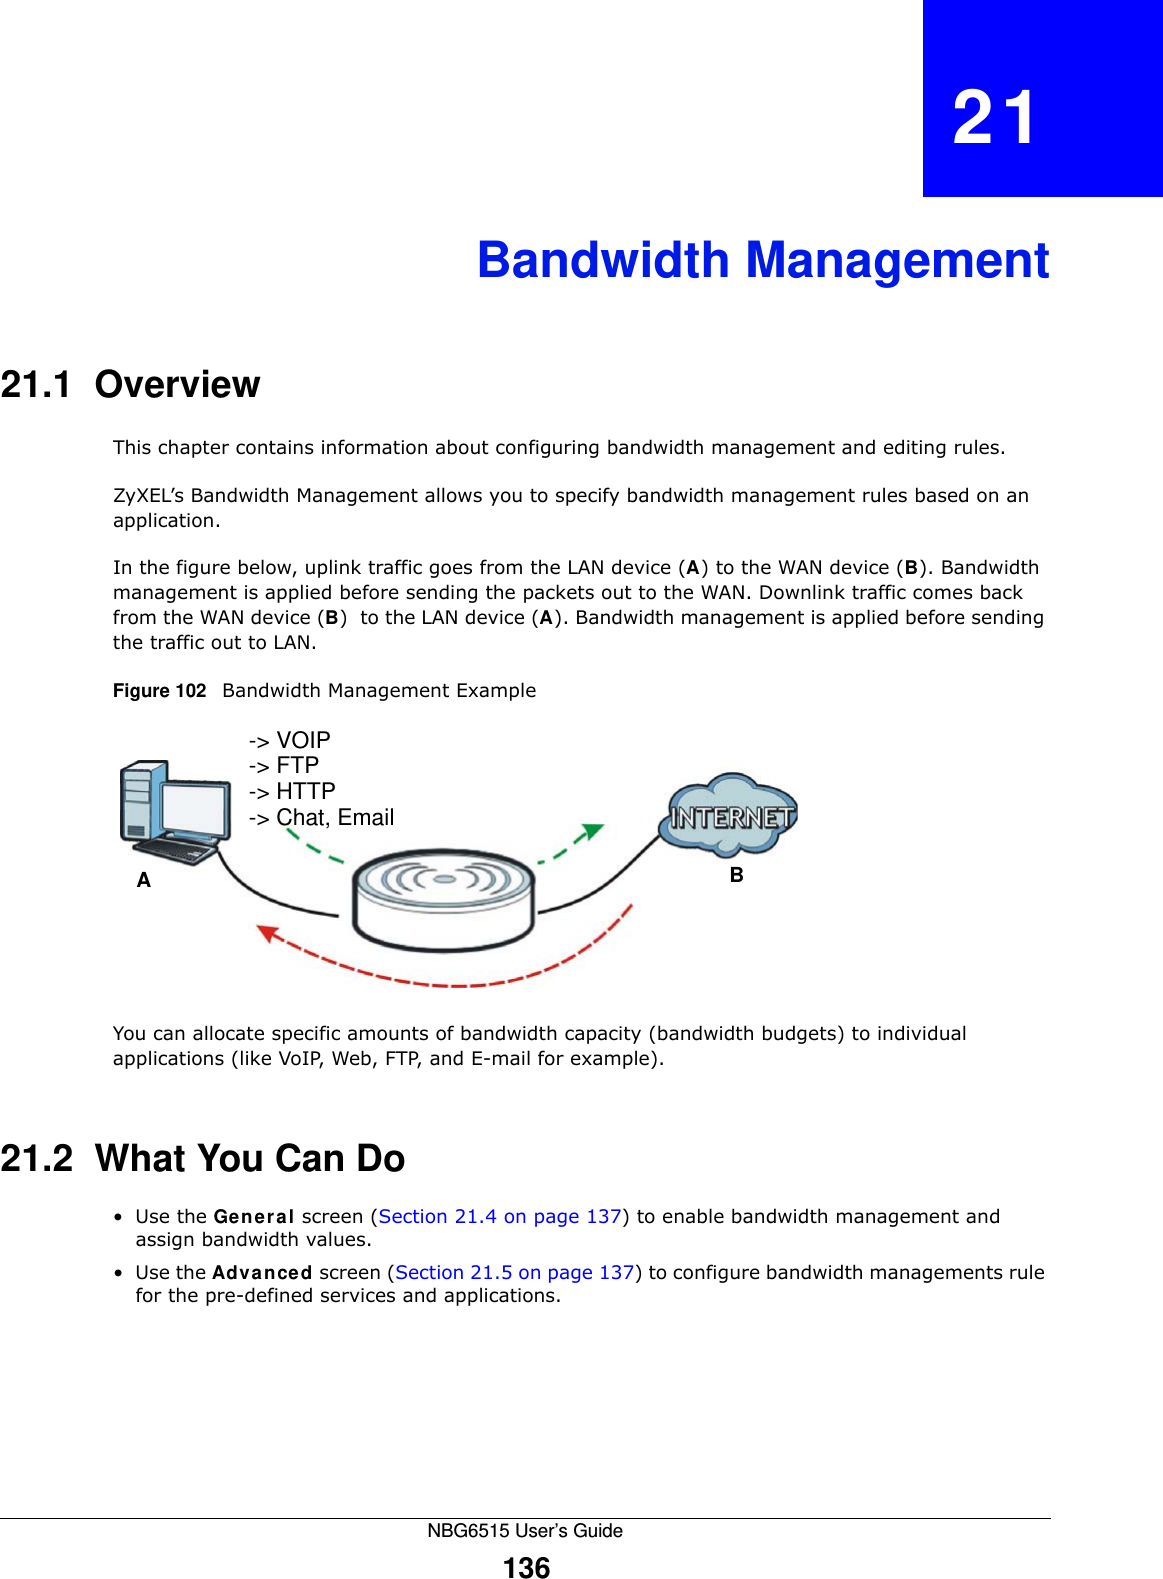 NBG6515 User’s Guide136CHAPTER   21Bandwidth Management21.1  Overview This chapter contains information about configuring bandwidth management and editing rules.ZyXEL’s Bandwidth Management allows you to specify bandwidth management rules based on an application. In the figure below, uplink traffic goes from the LAN device (A) to the WAN device (B). Bandwidth management is applied before sending the packets out to the WAN. Downlink traffic comes back from the WAN device (B)  to the LAN device (A). Bandwidth management is applied before sending the traffic out to LAN.Figure 102   Bandwidth Management ExampleYou can allocate specific amounts of bandwidth capacity (bandwidth budgets) to individual applications (like VoIP, Web, FTP, and E-mail for example).21.2  What You Can Do•Use the General screen (Section 21.4 on page 137) to enable bandwidth management and assign bandwidth values.•Use the Advanced screen (Section 21.5 on page 137) to configure bandwidth managements rule for the pre-defined services and applications.AB-&gt; VOIP-&gt; FTP-&gt; HTTP-&gt; Chat, Email